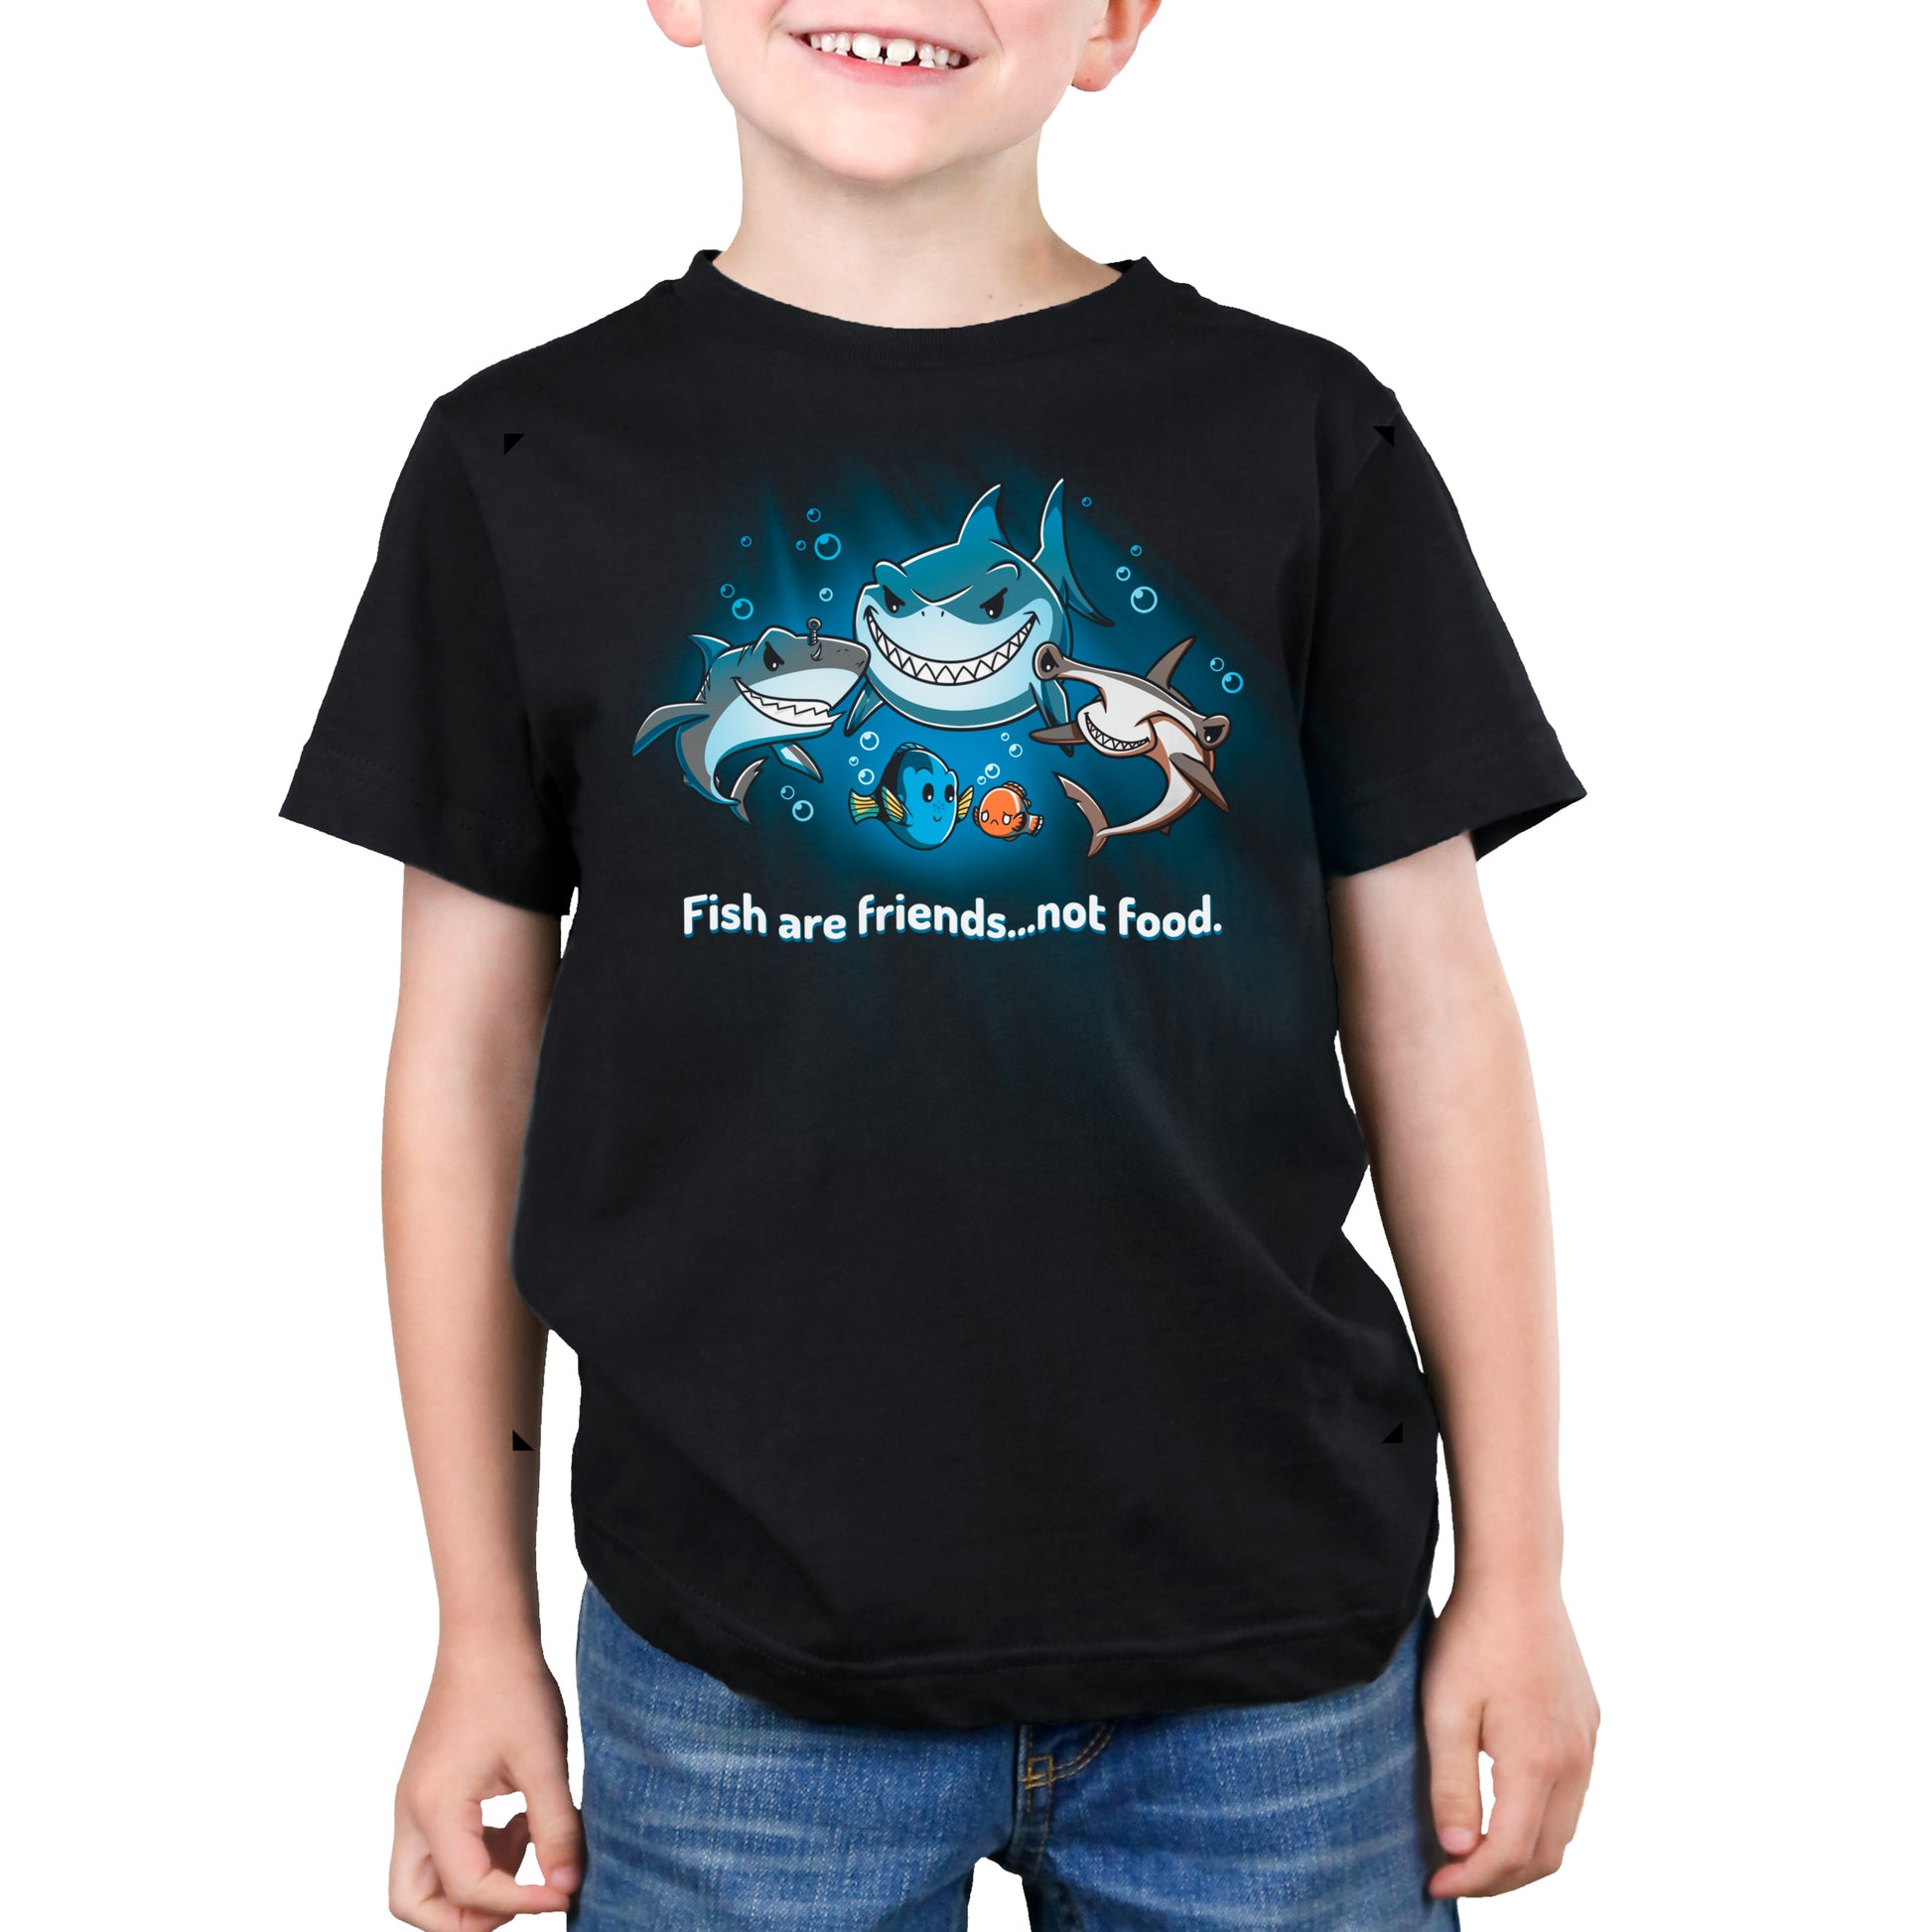 A young boy wearing a licensed Pixar Fish Are Friends...Not Food t-shirt.